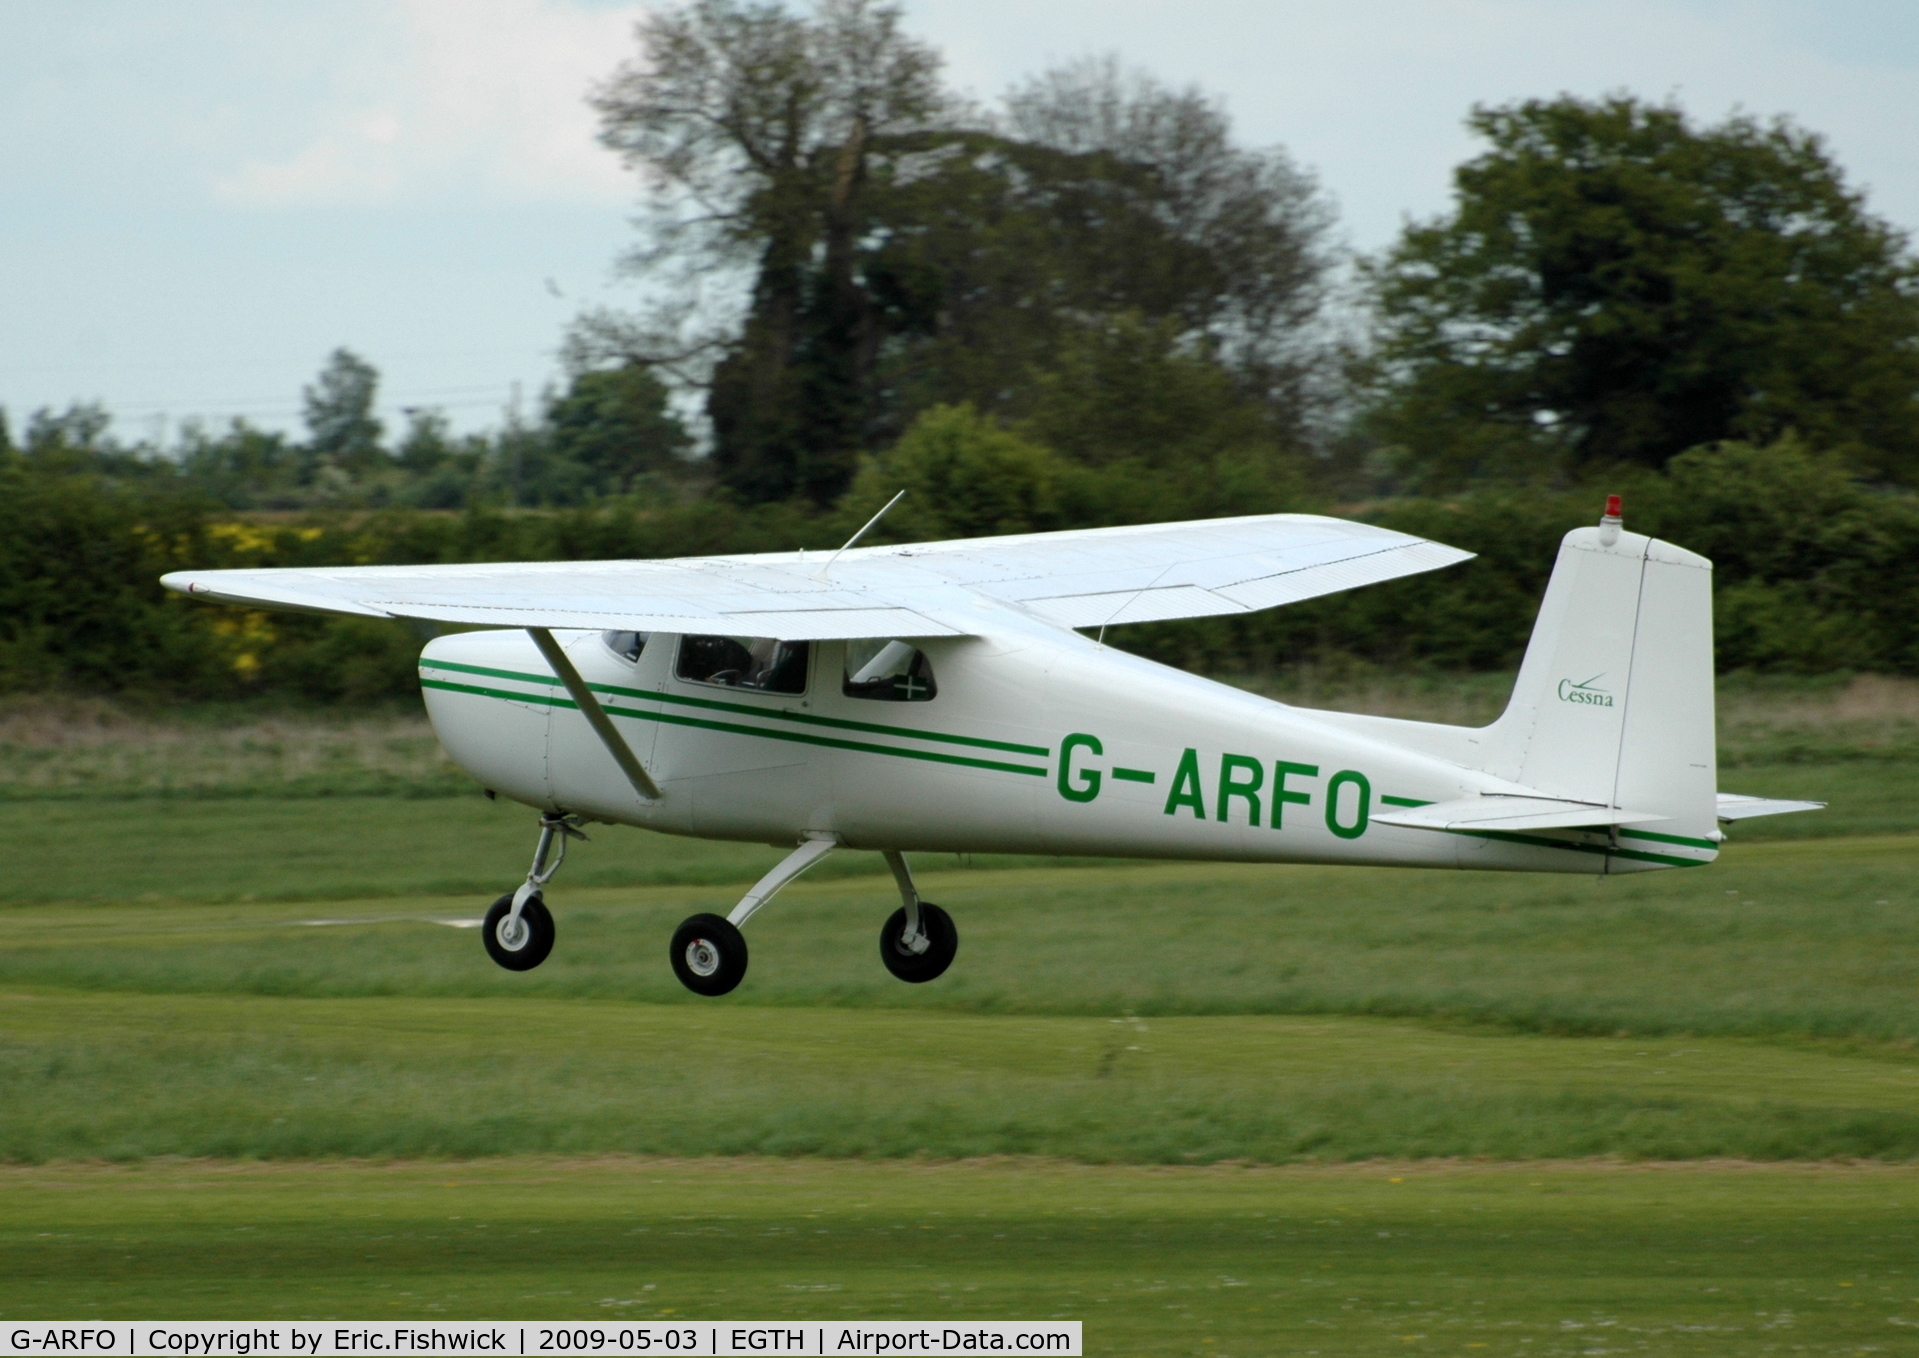 G-ARFO, 1961 Cessna 150A C/N 15059174, 4. G-ARFO departing the Shuttleworth Collection Spring Air Display.